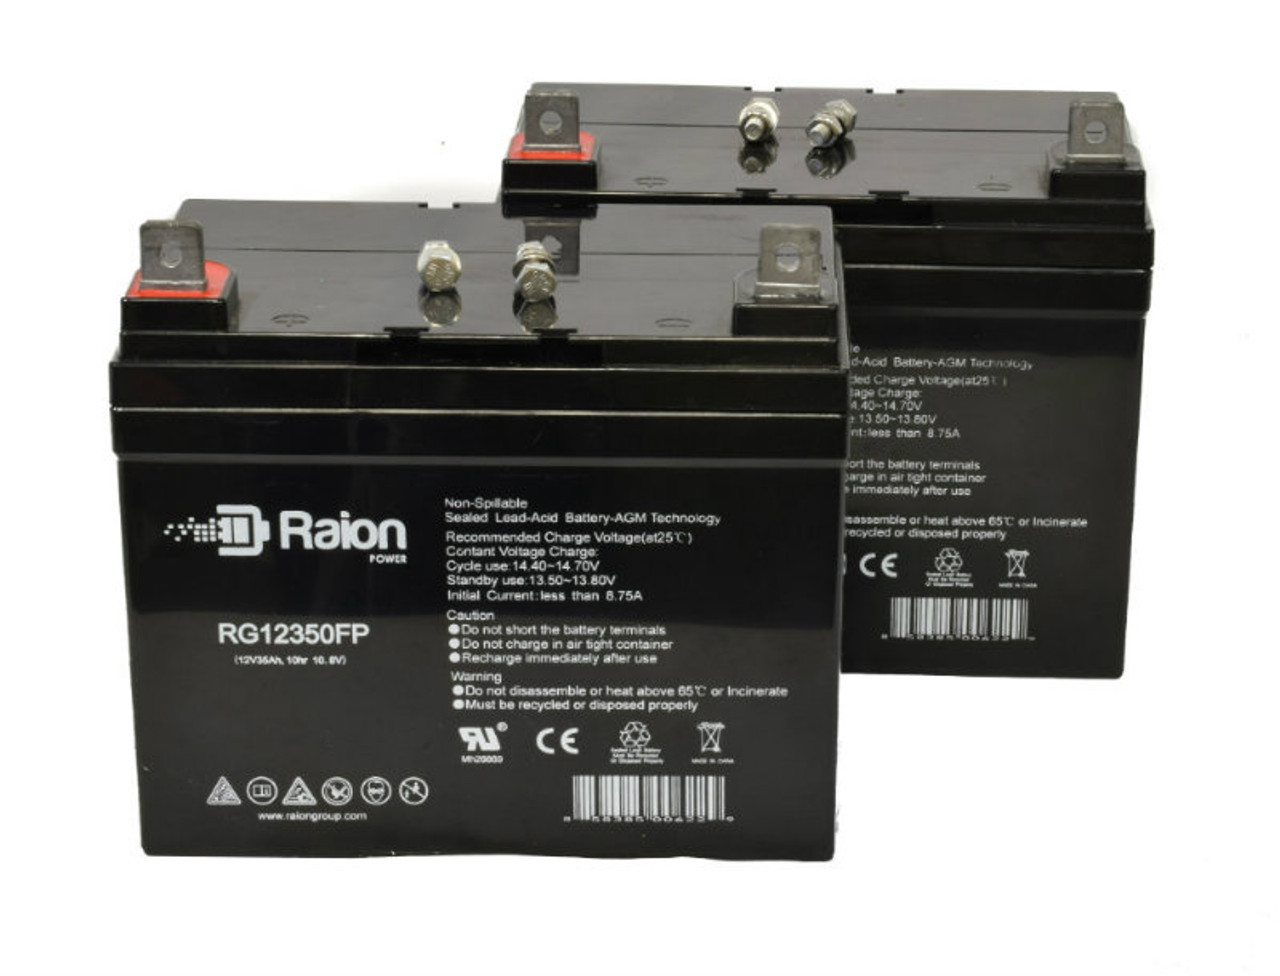 Raion Power Replacement 12V 35Ah Lawn Mower Battery for E.T. Rugg Co. 5049-E4 - 2 Pack